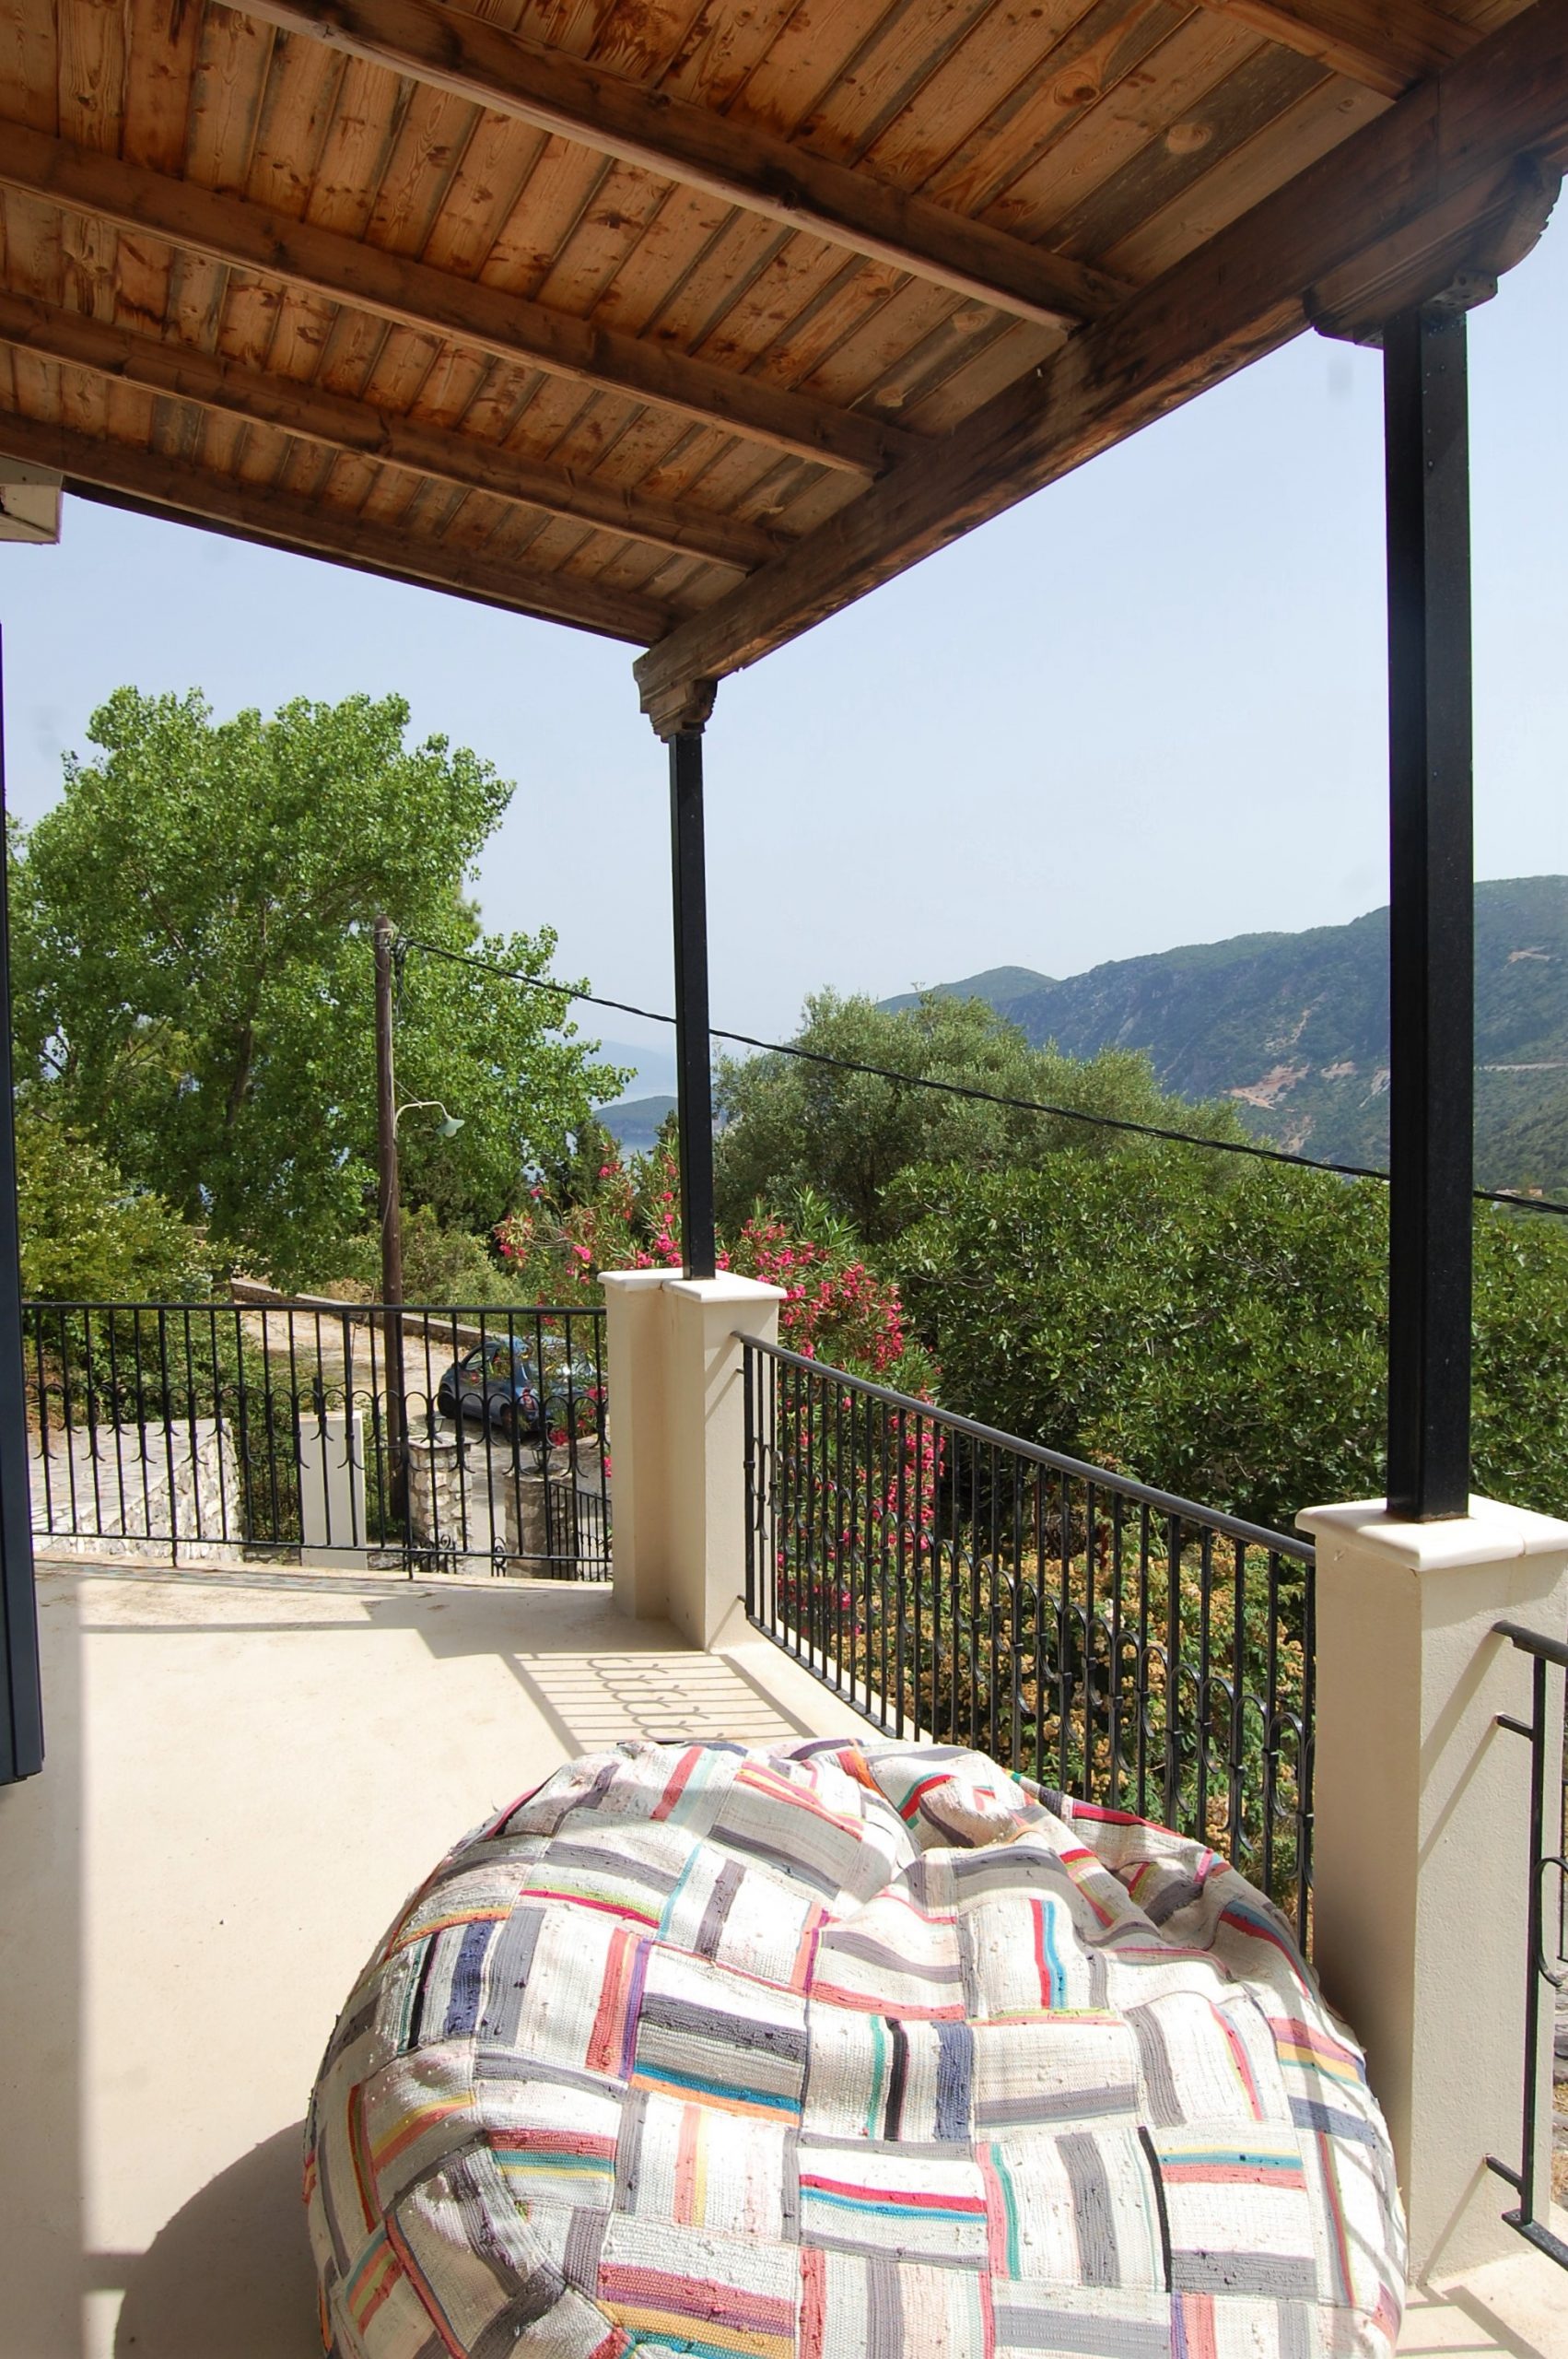 Balcony of holiday house for rent on Ithaca Greece, Kolleri